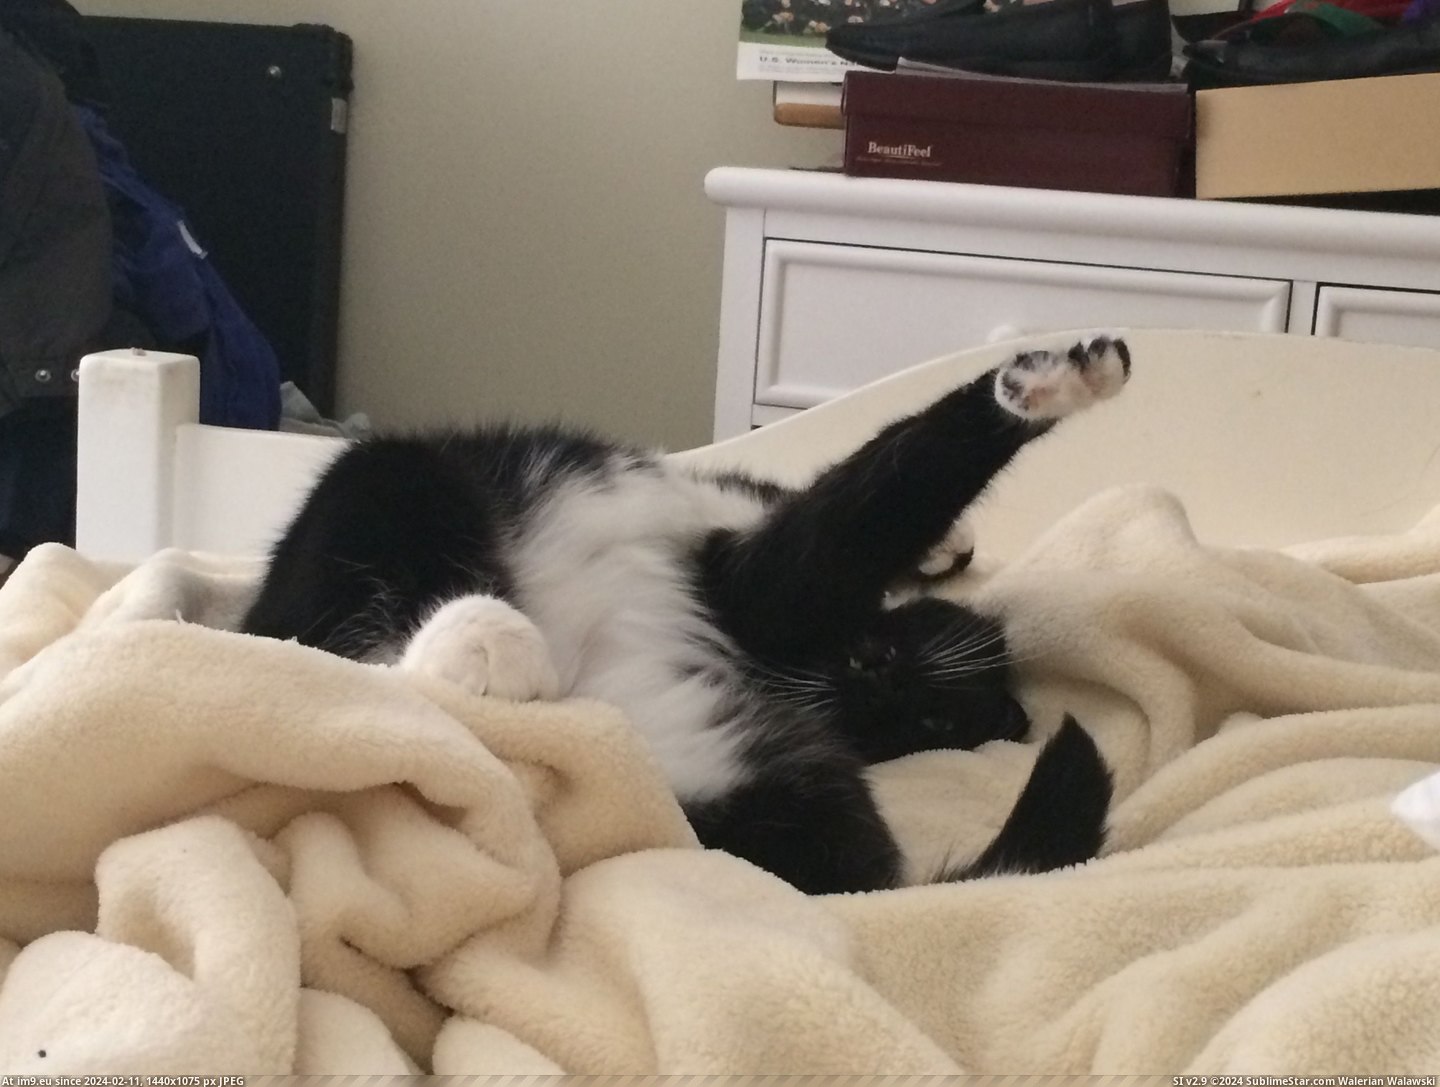 #Cats #Cat #Loki #Stupidest #Faces #Idiot [Cats] This is my idiot cat, Loki. She makes the stupidest faces I've ever seen. 9 Pic. (Image of album My r/CATS favs))